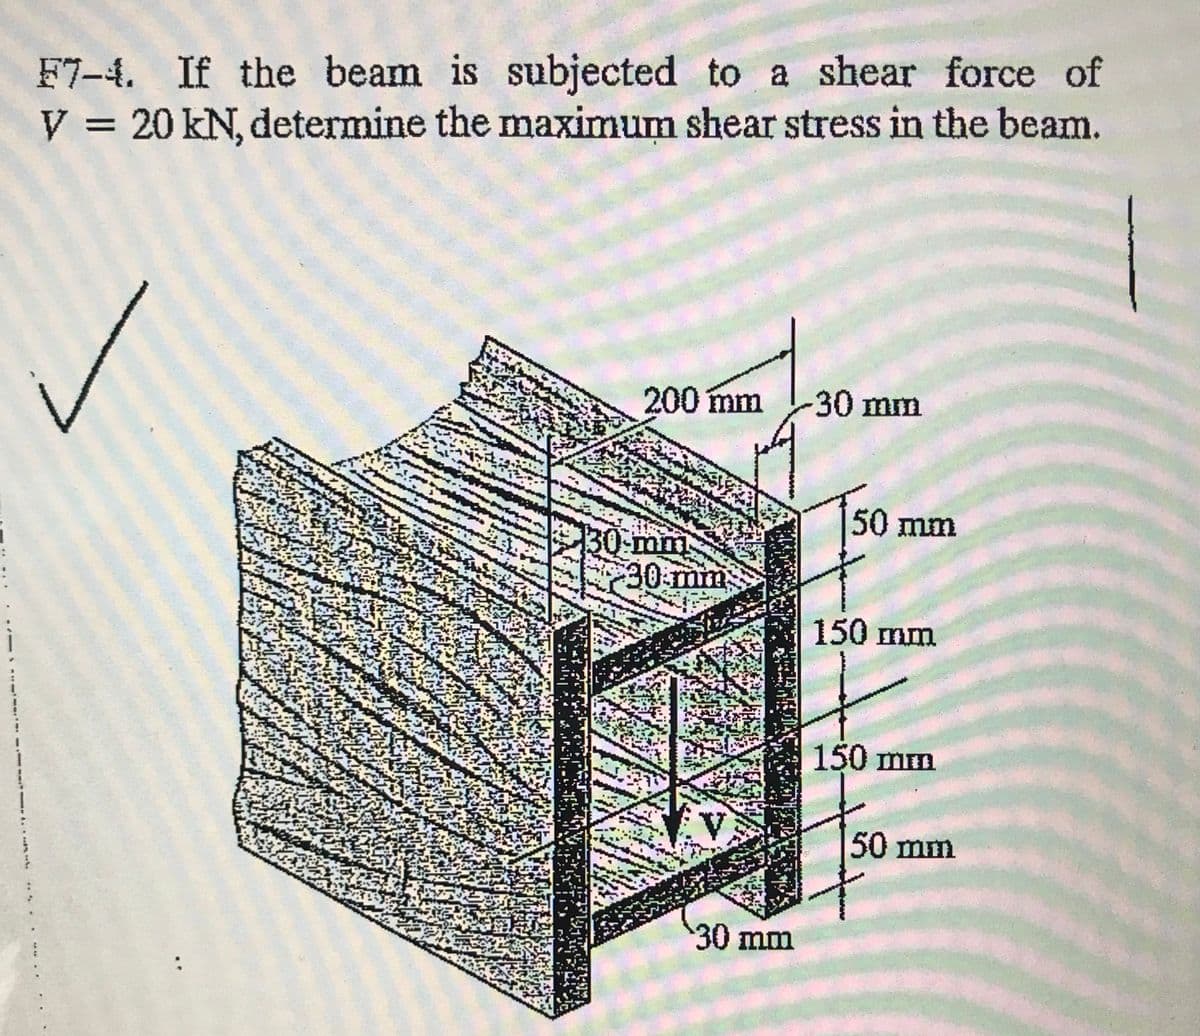 F7-4. If the beam is subjected to a shear force of
V = 20 kN, determine the maximum shear stress in the beam.
%3D
200 mm
30mm
50 mm
30-mm
30.mm
150 mm
150 mm
V
50 mm
30mm
